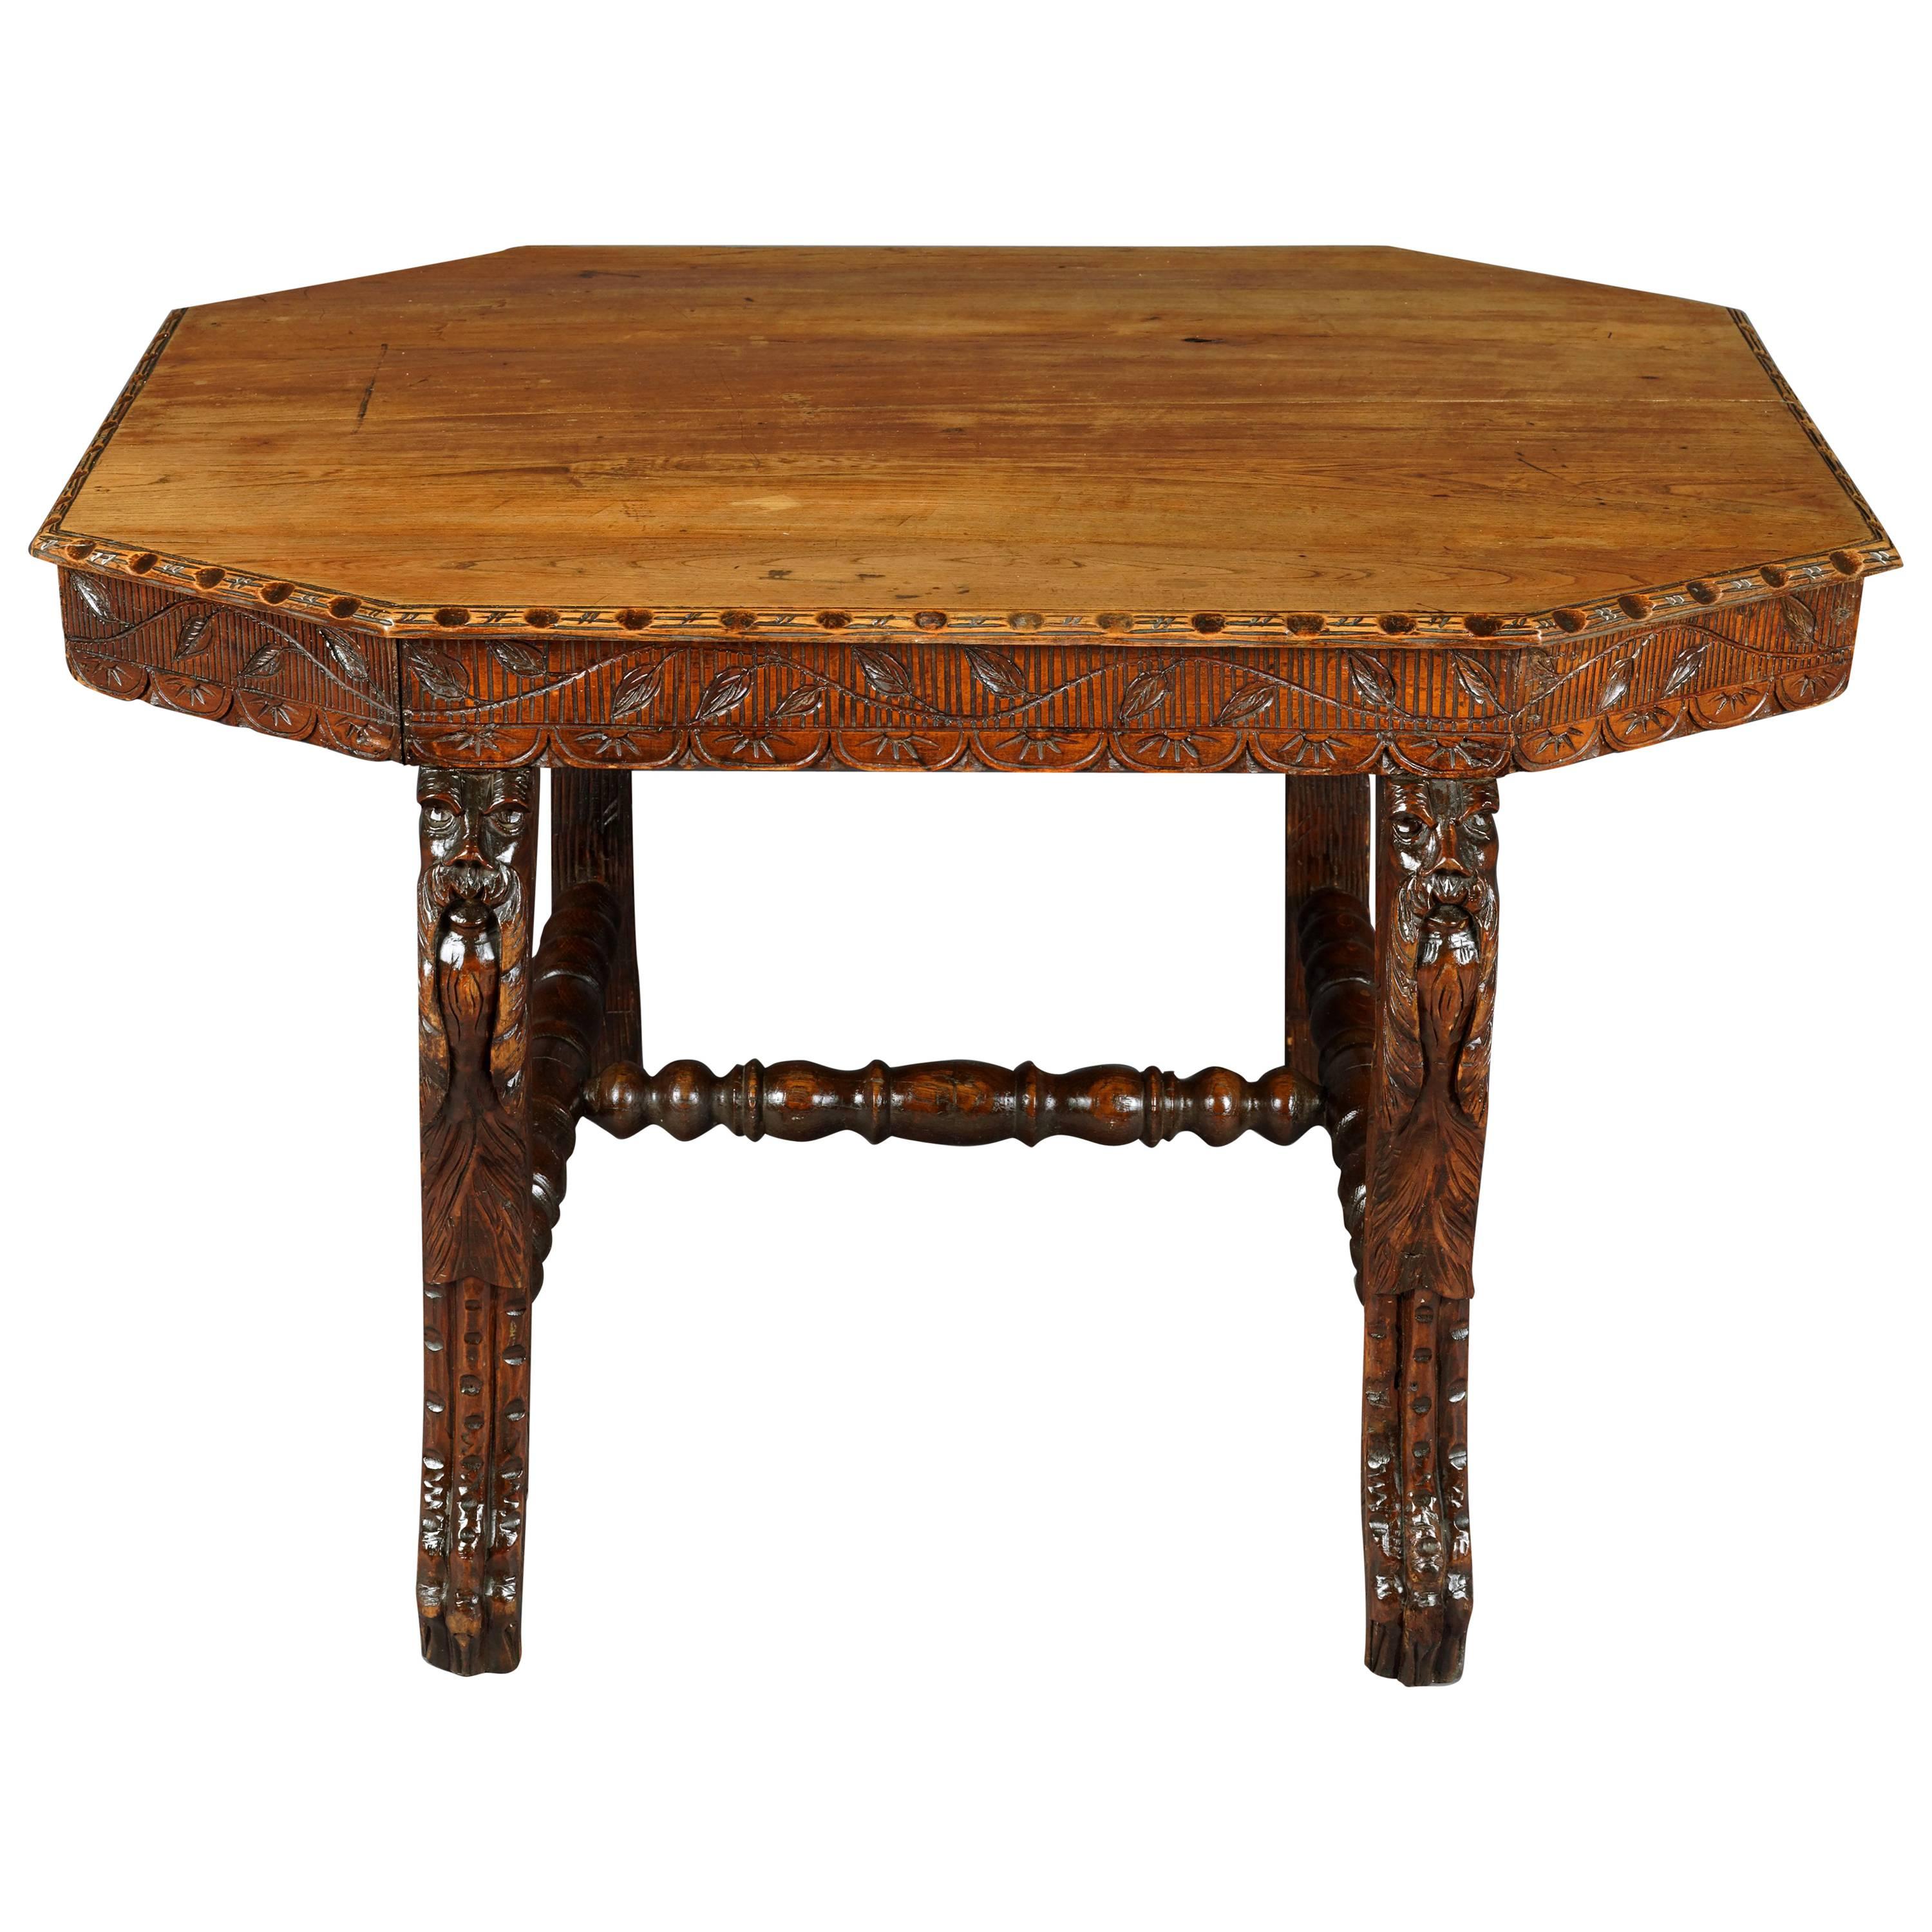 19th Century Antique Oak Table in Historicism Style, circa 1880